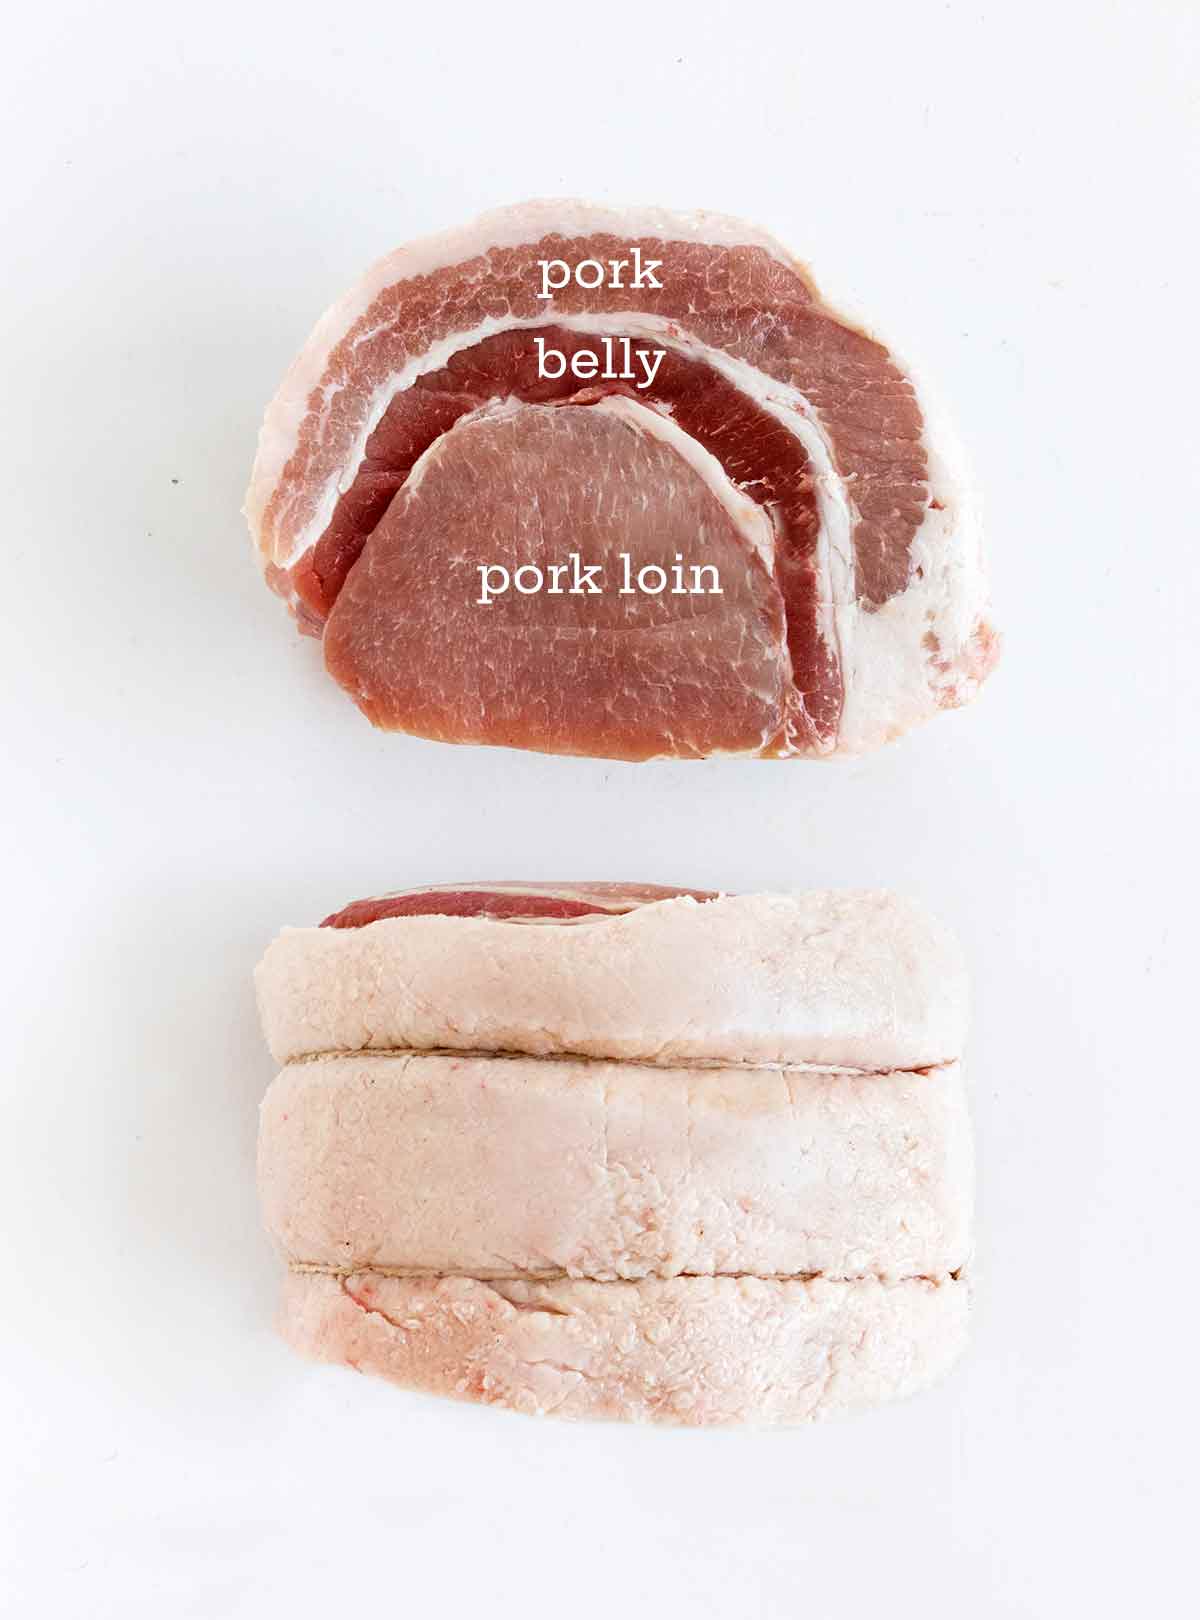 A pork loin with a pork belly cap, sliced and labelled.